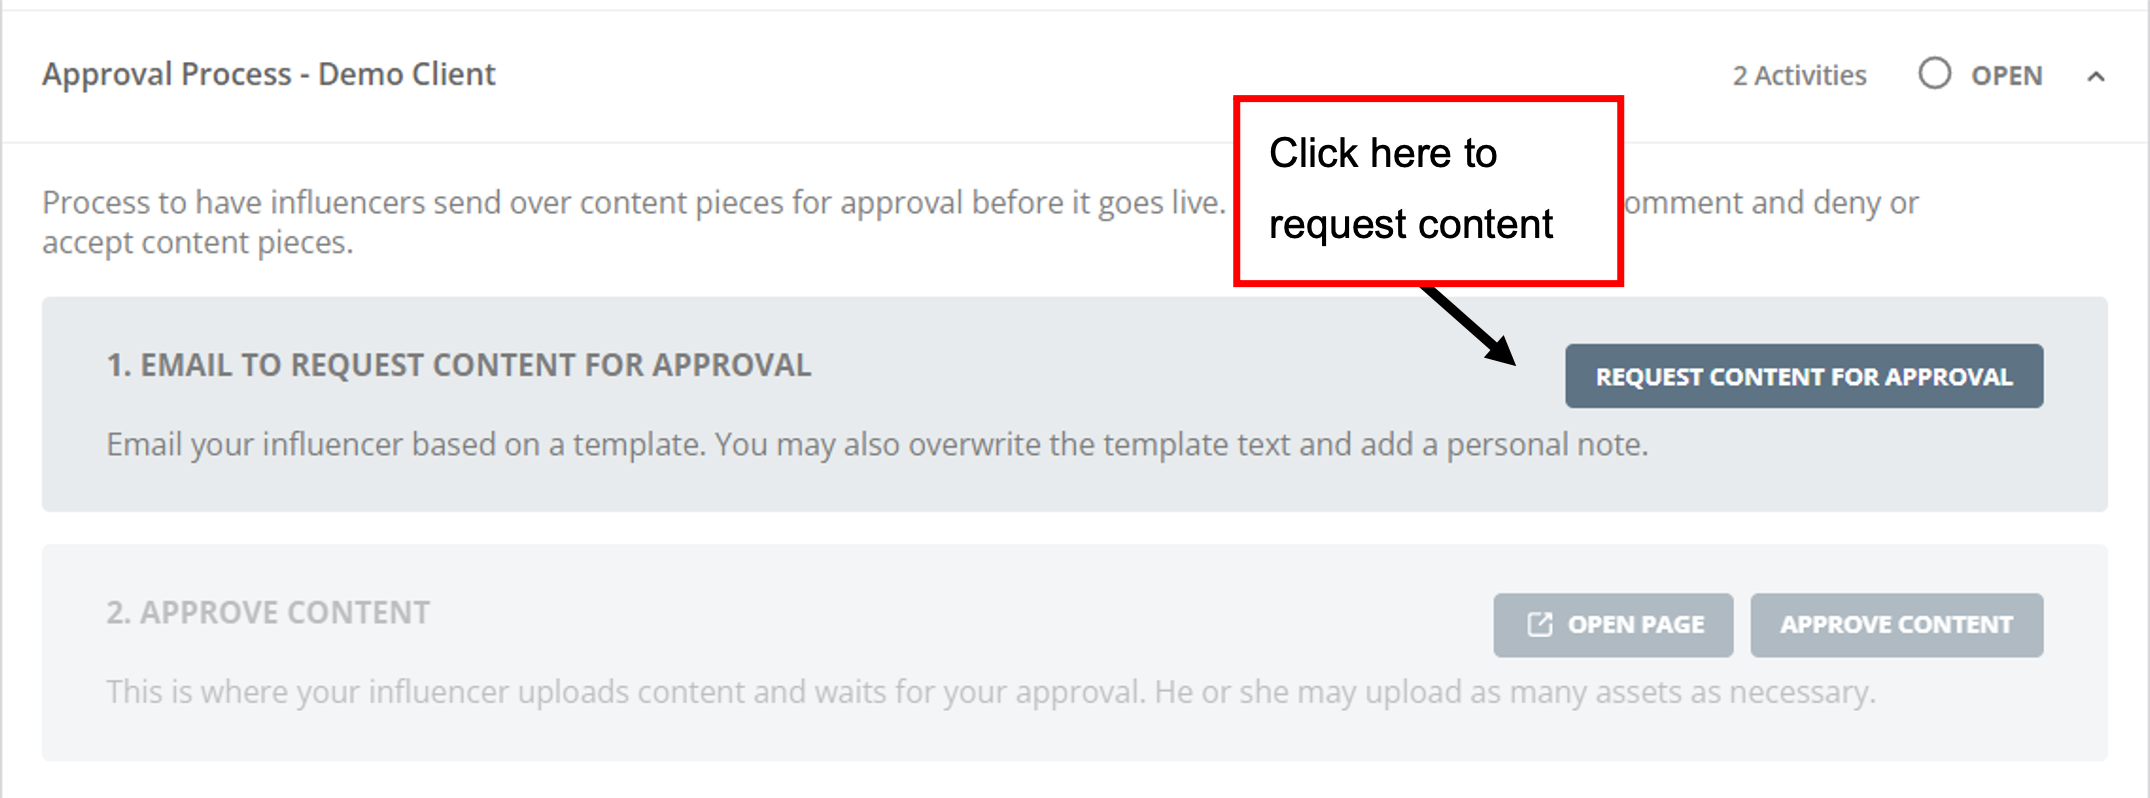 66: Approval Process_Request content